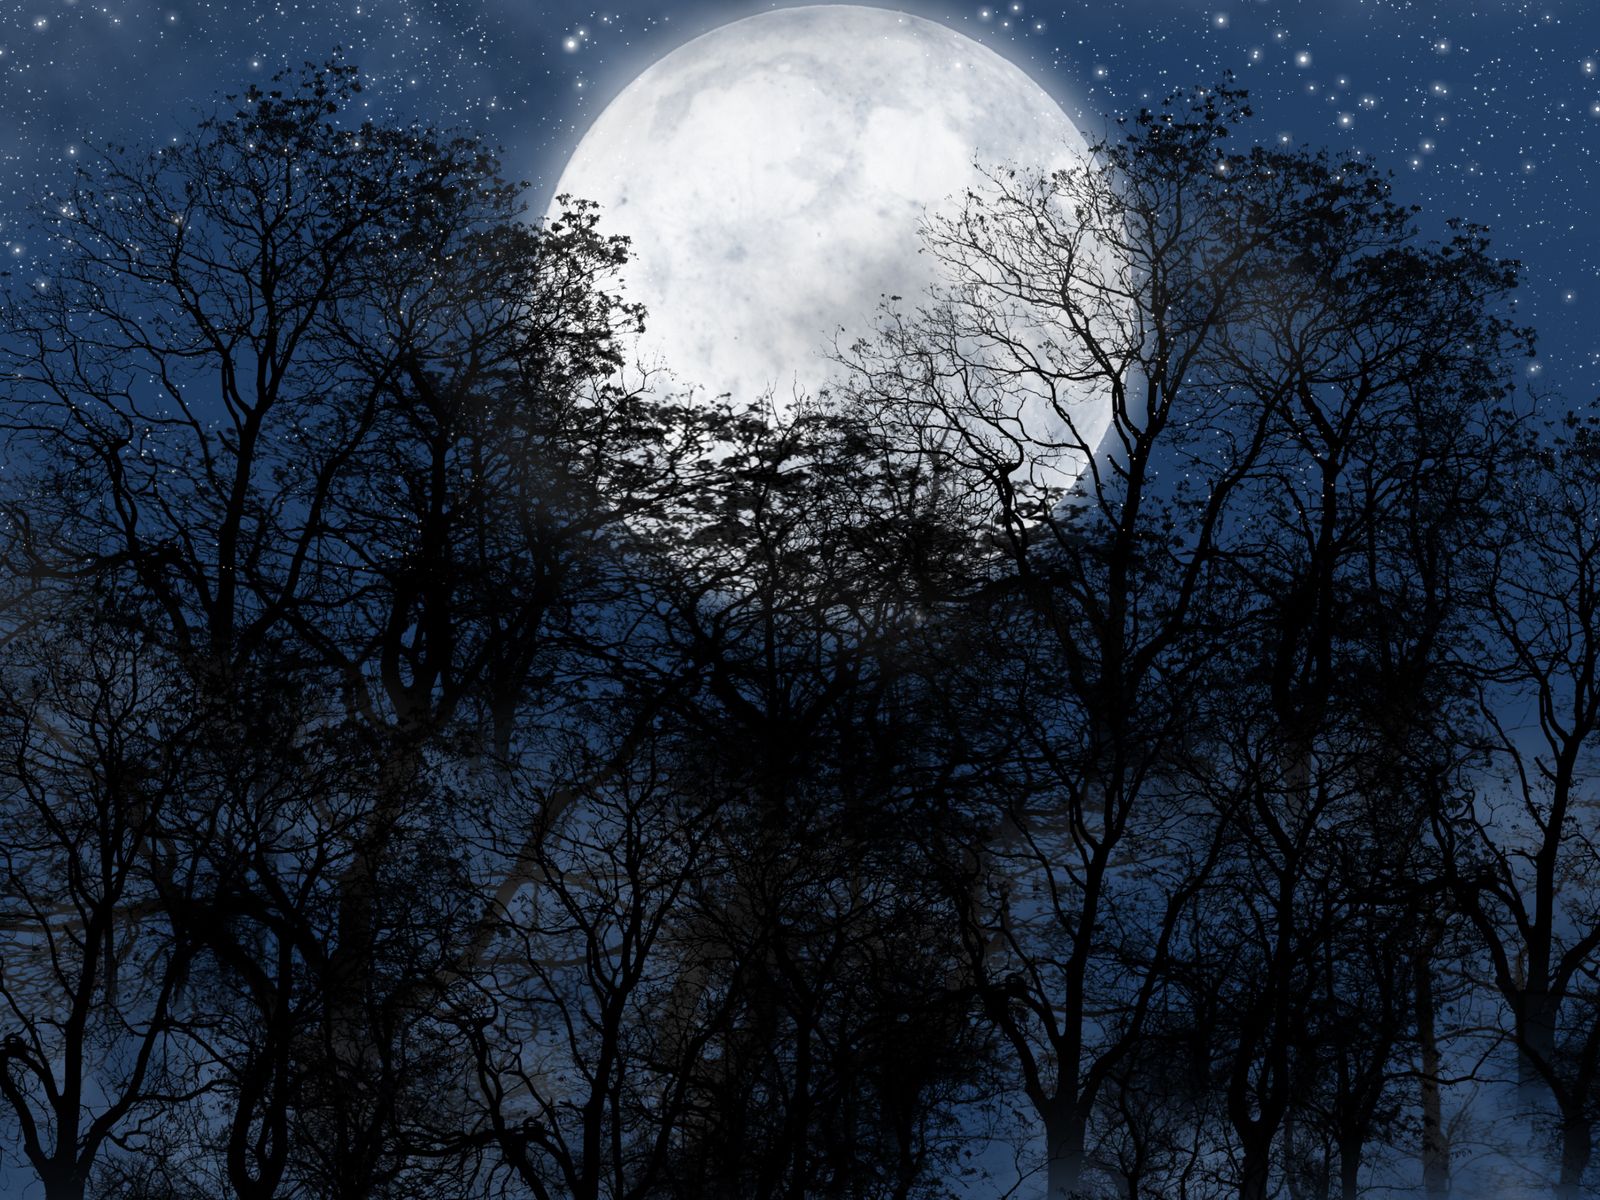 Download mobile wallpaper: Moon, Night, Trees, Landscape, free. 19322.